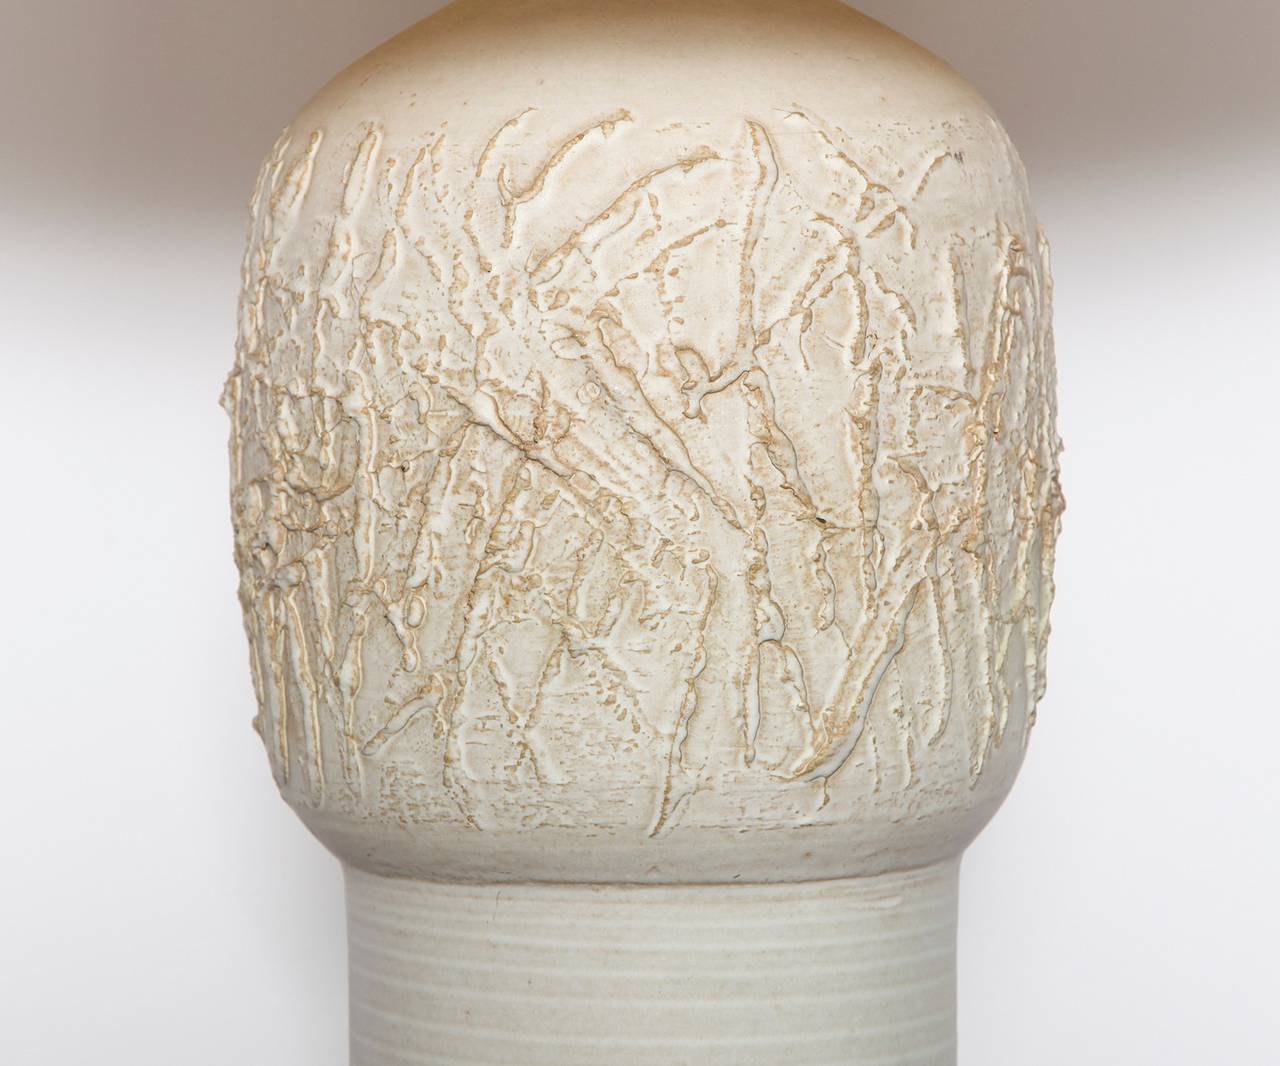 Ceramic table lamp by Lee Rosen for Design Technics.  Cylindrical earthenware form with abstract relief on bulbous upper section. Woven burlap shade in an off-white tone. Two standard sized Edison sockets. Signed with makers logo.